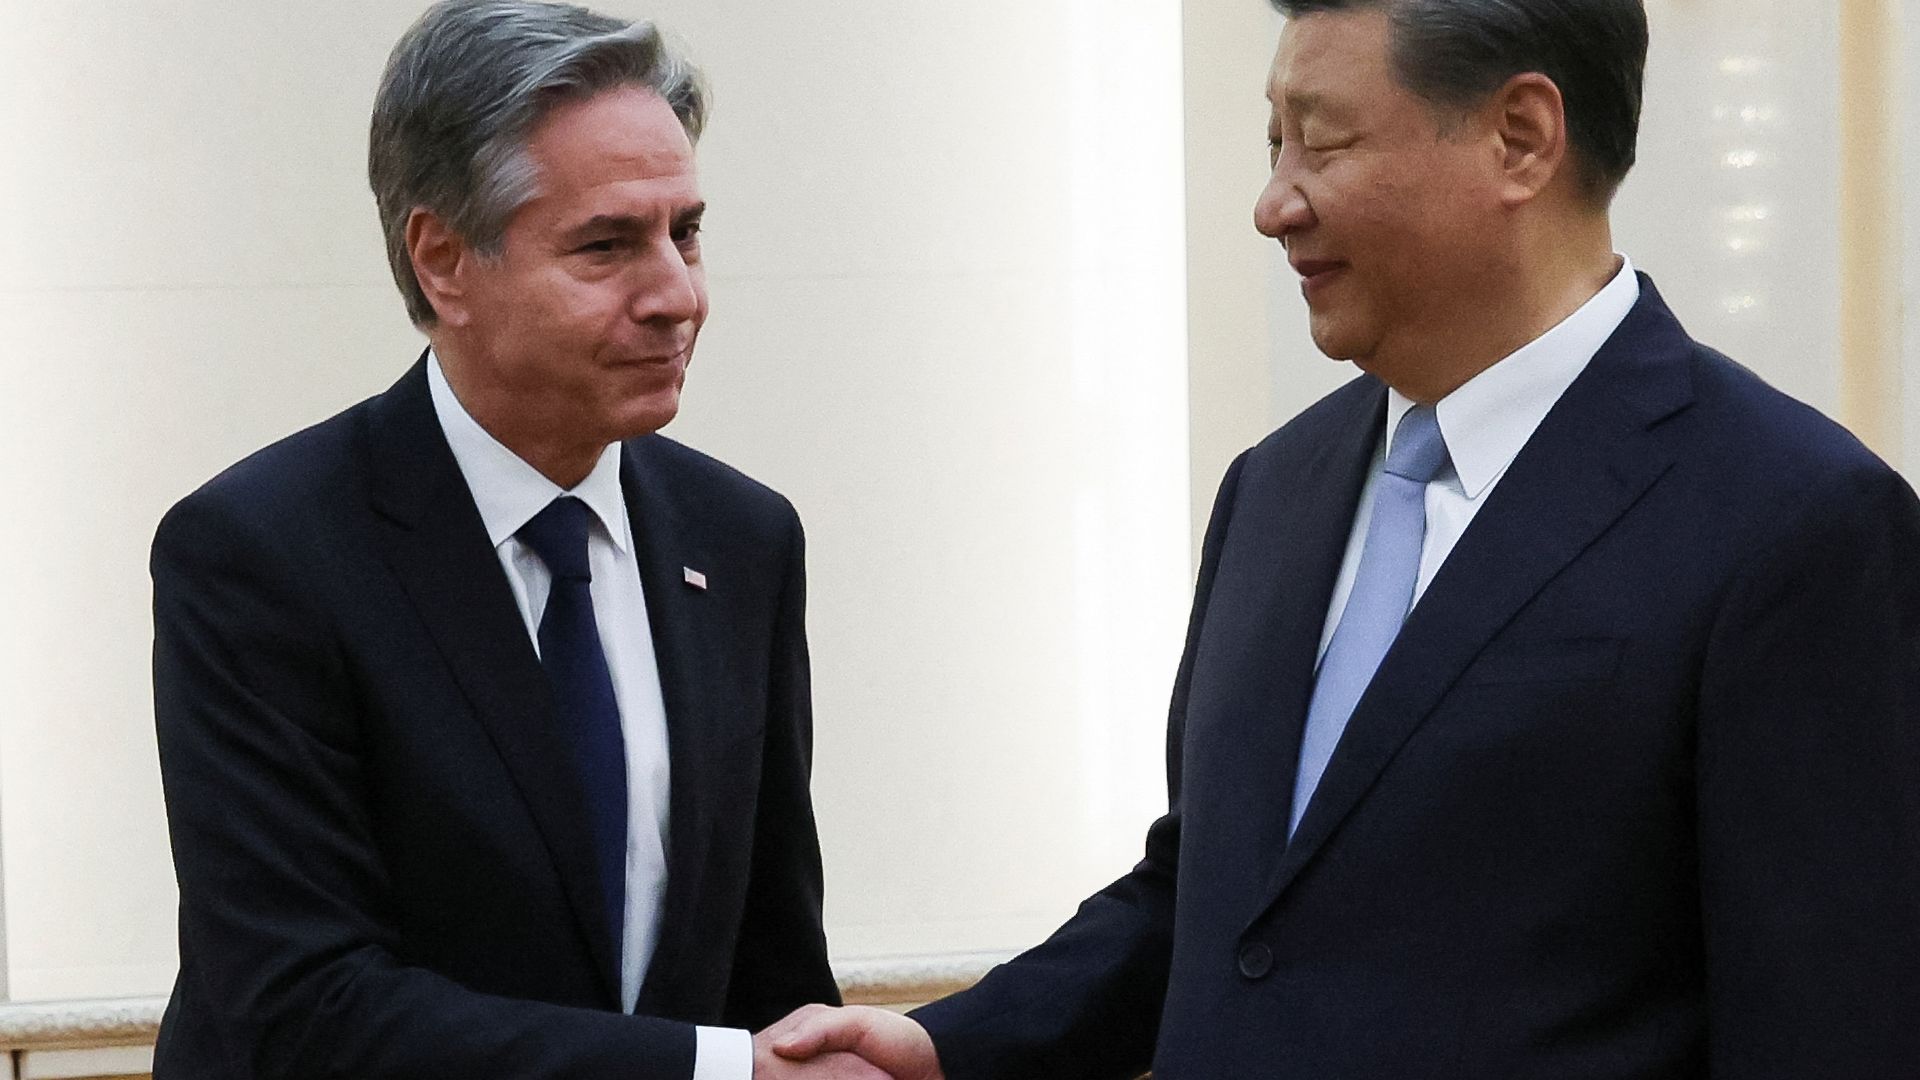 Secretary of State Antony Blinken's visit to China may be more about intelligence gathering than it is about repairing diplomatic relations.